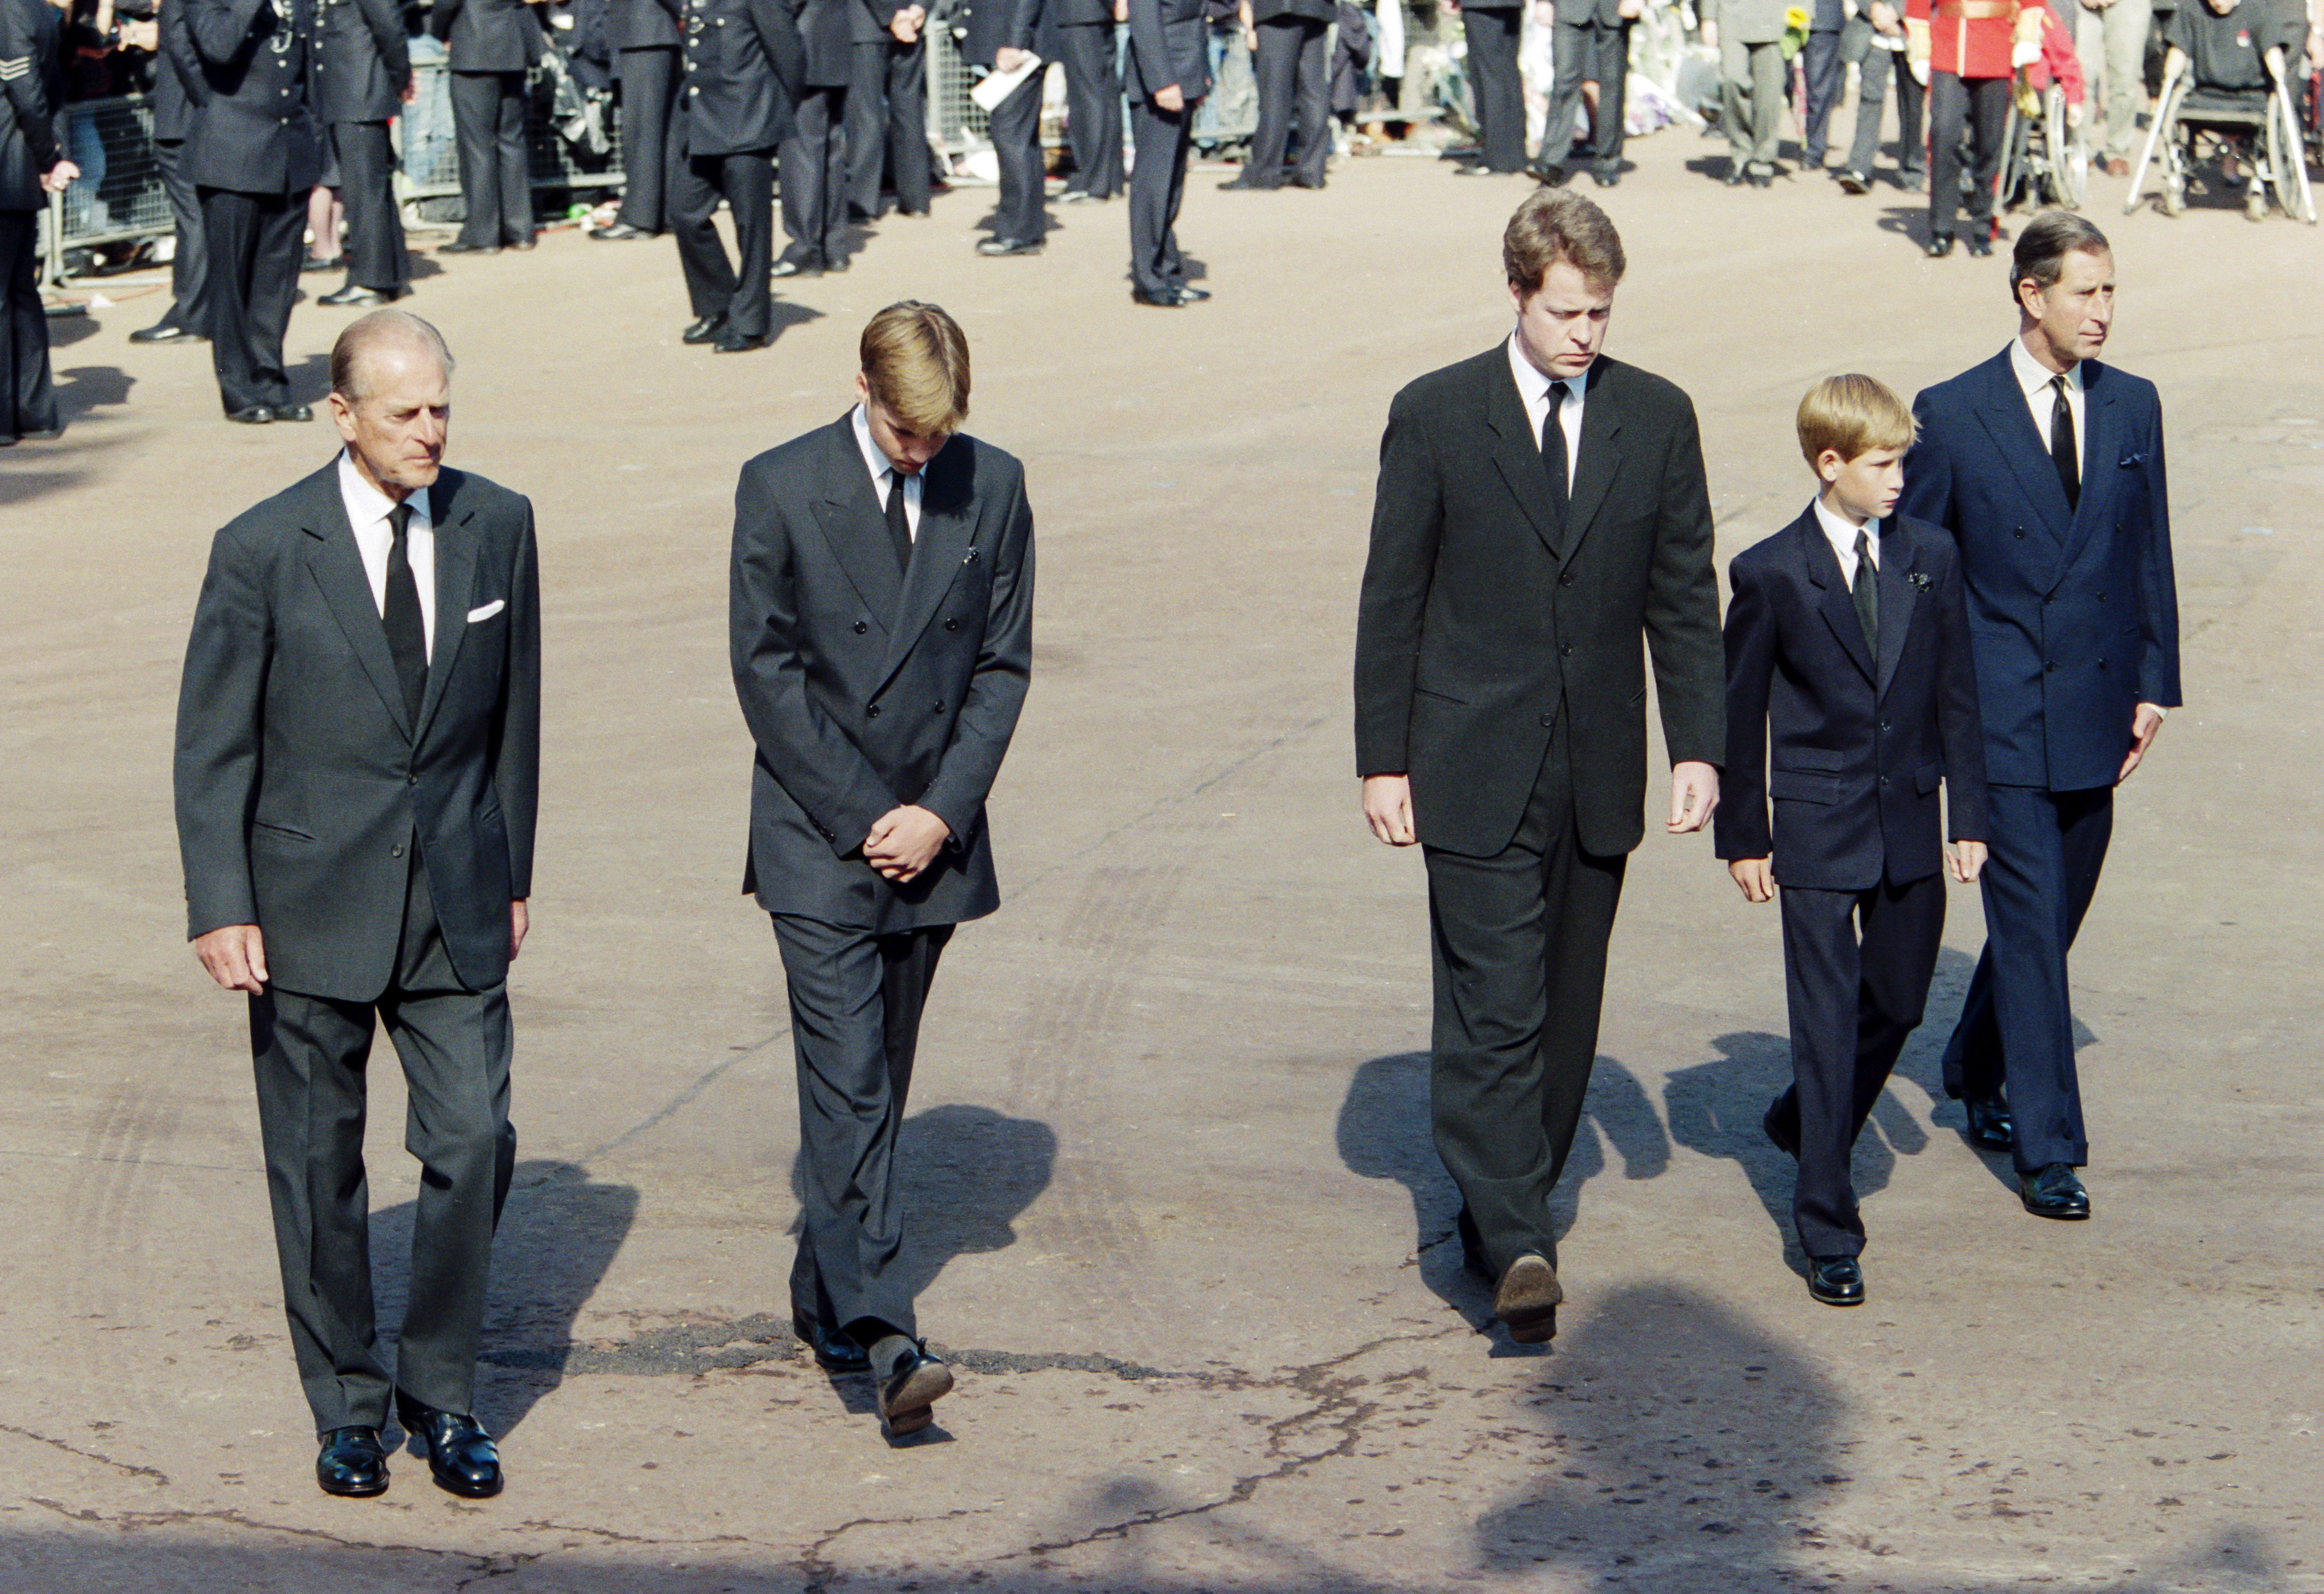 (L-R): Prince Philip, Prince William, Earl Spencer, Prince Harry, and Charles joining in Princess Diana's funeral procession